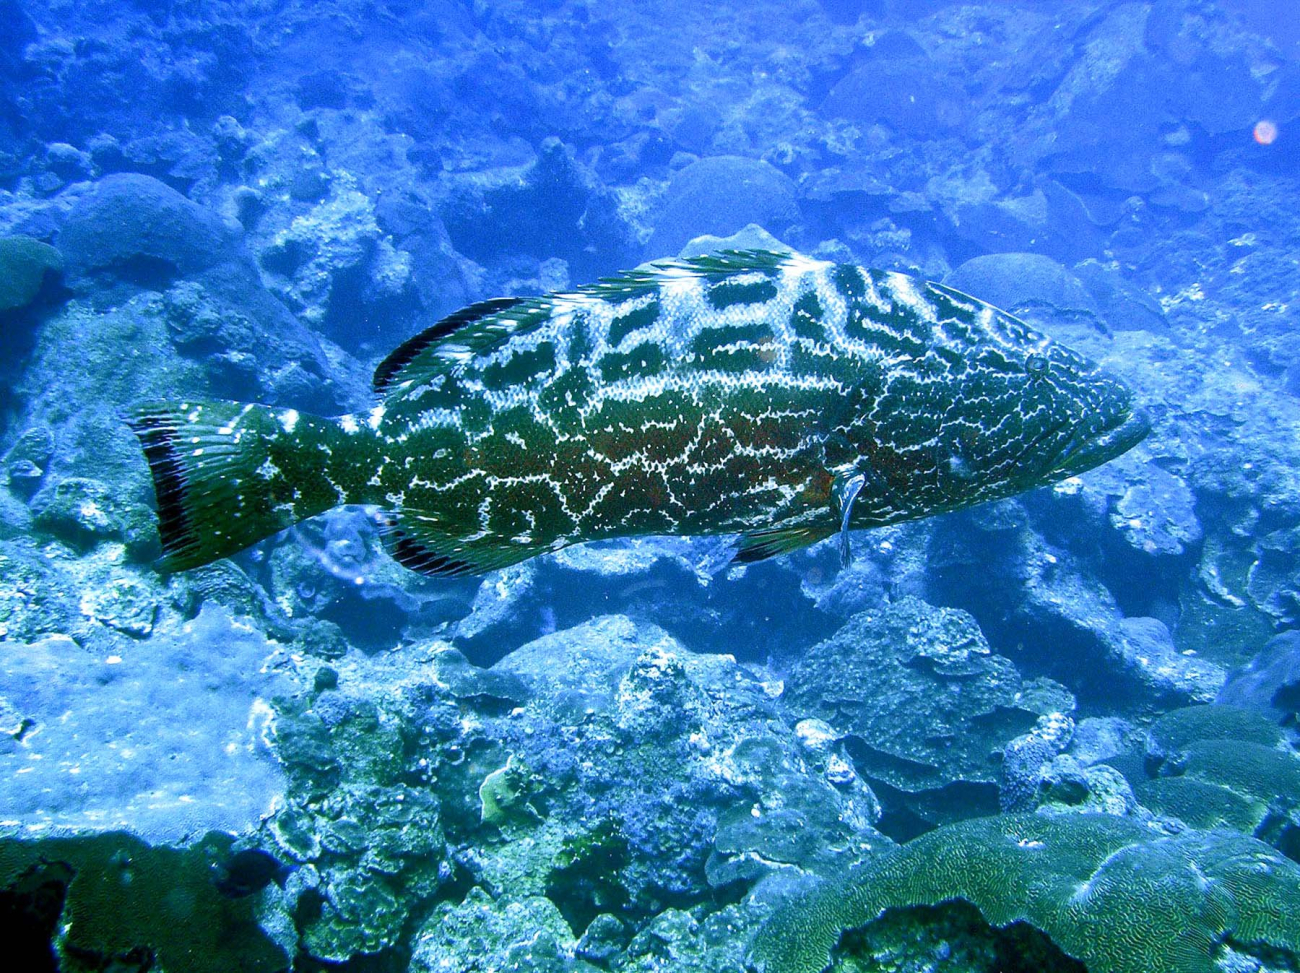 A large yellow mouth grouper swimming over